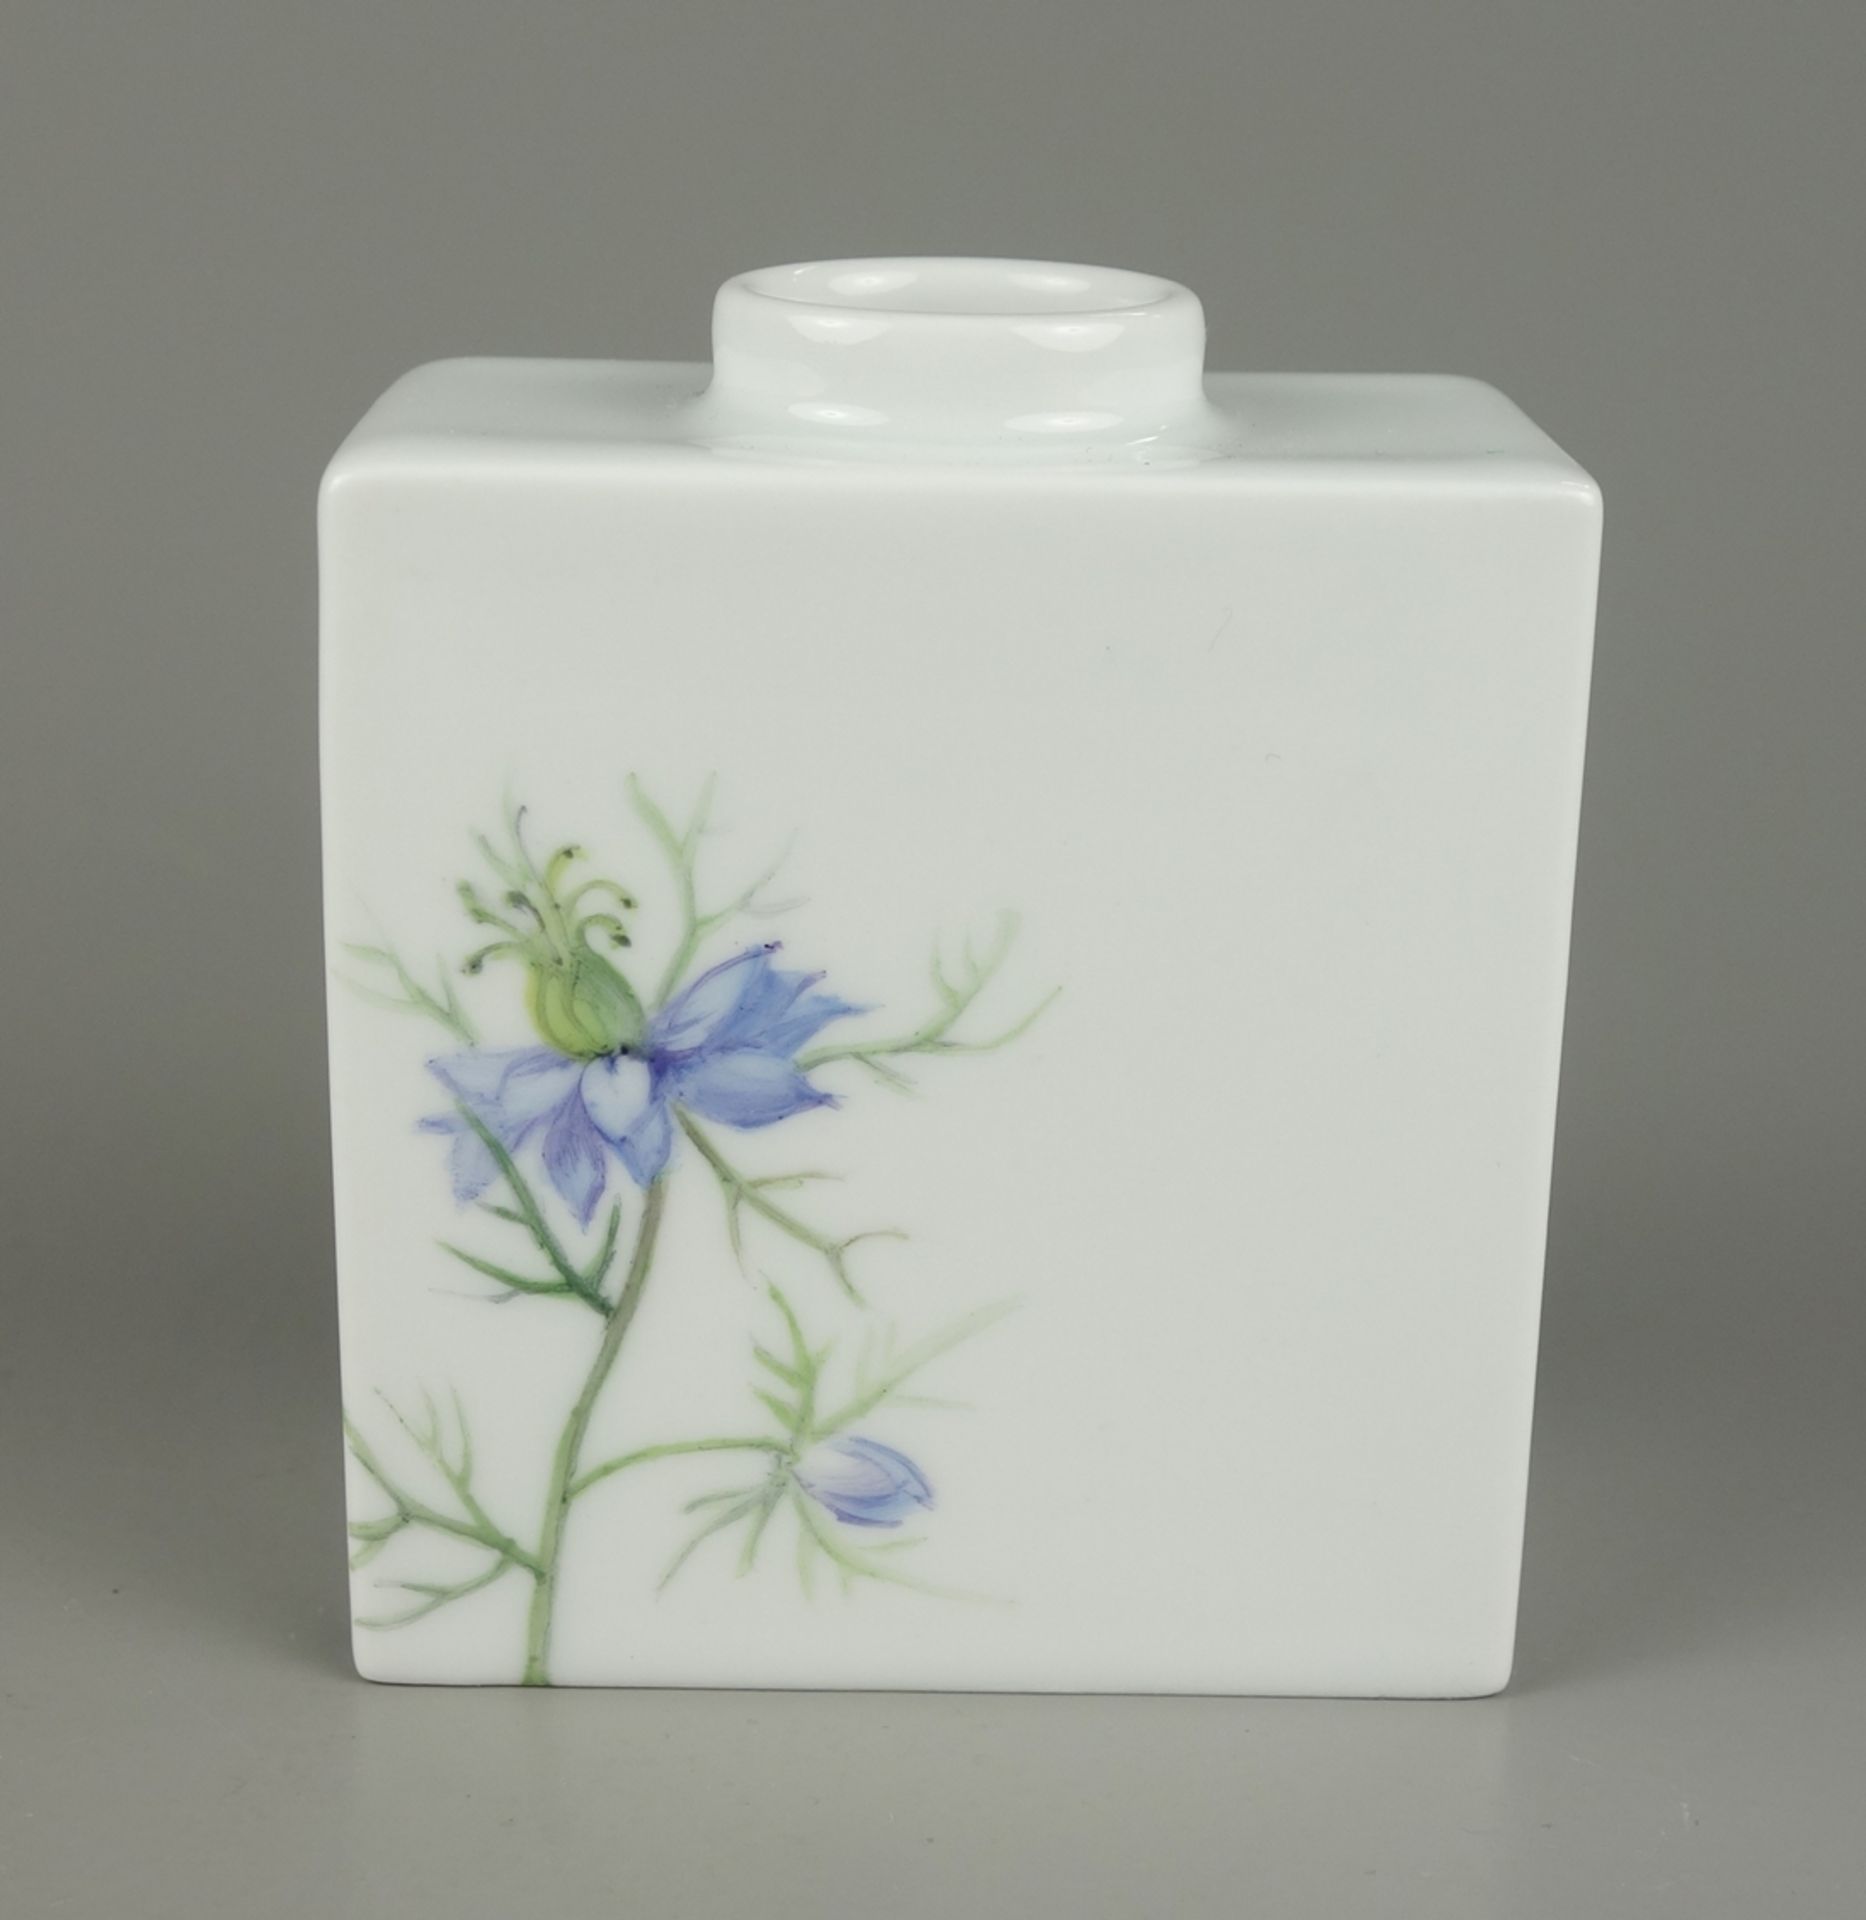 Vase Cadre with hand painting, design Trude Petri for KPM Berlin, 2nd half 20th century